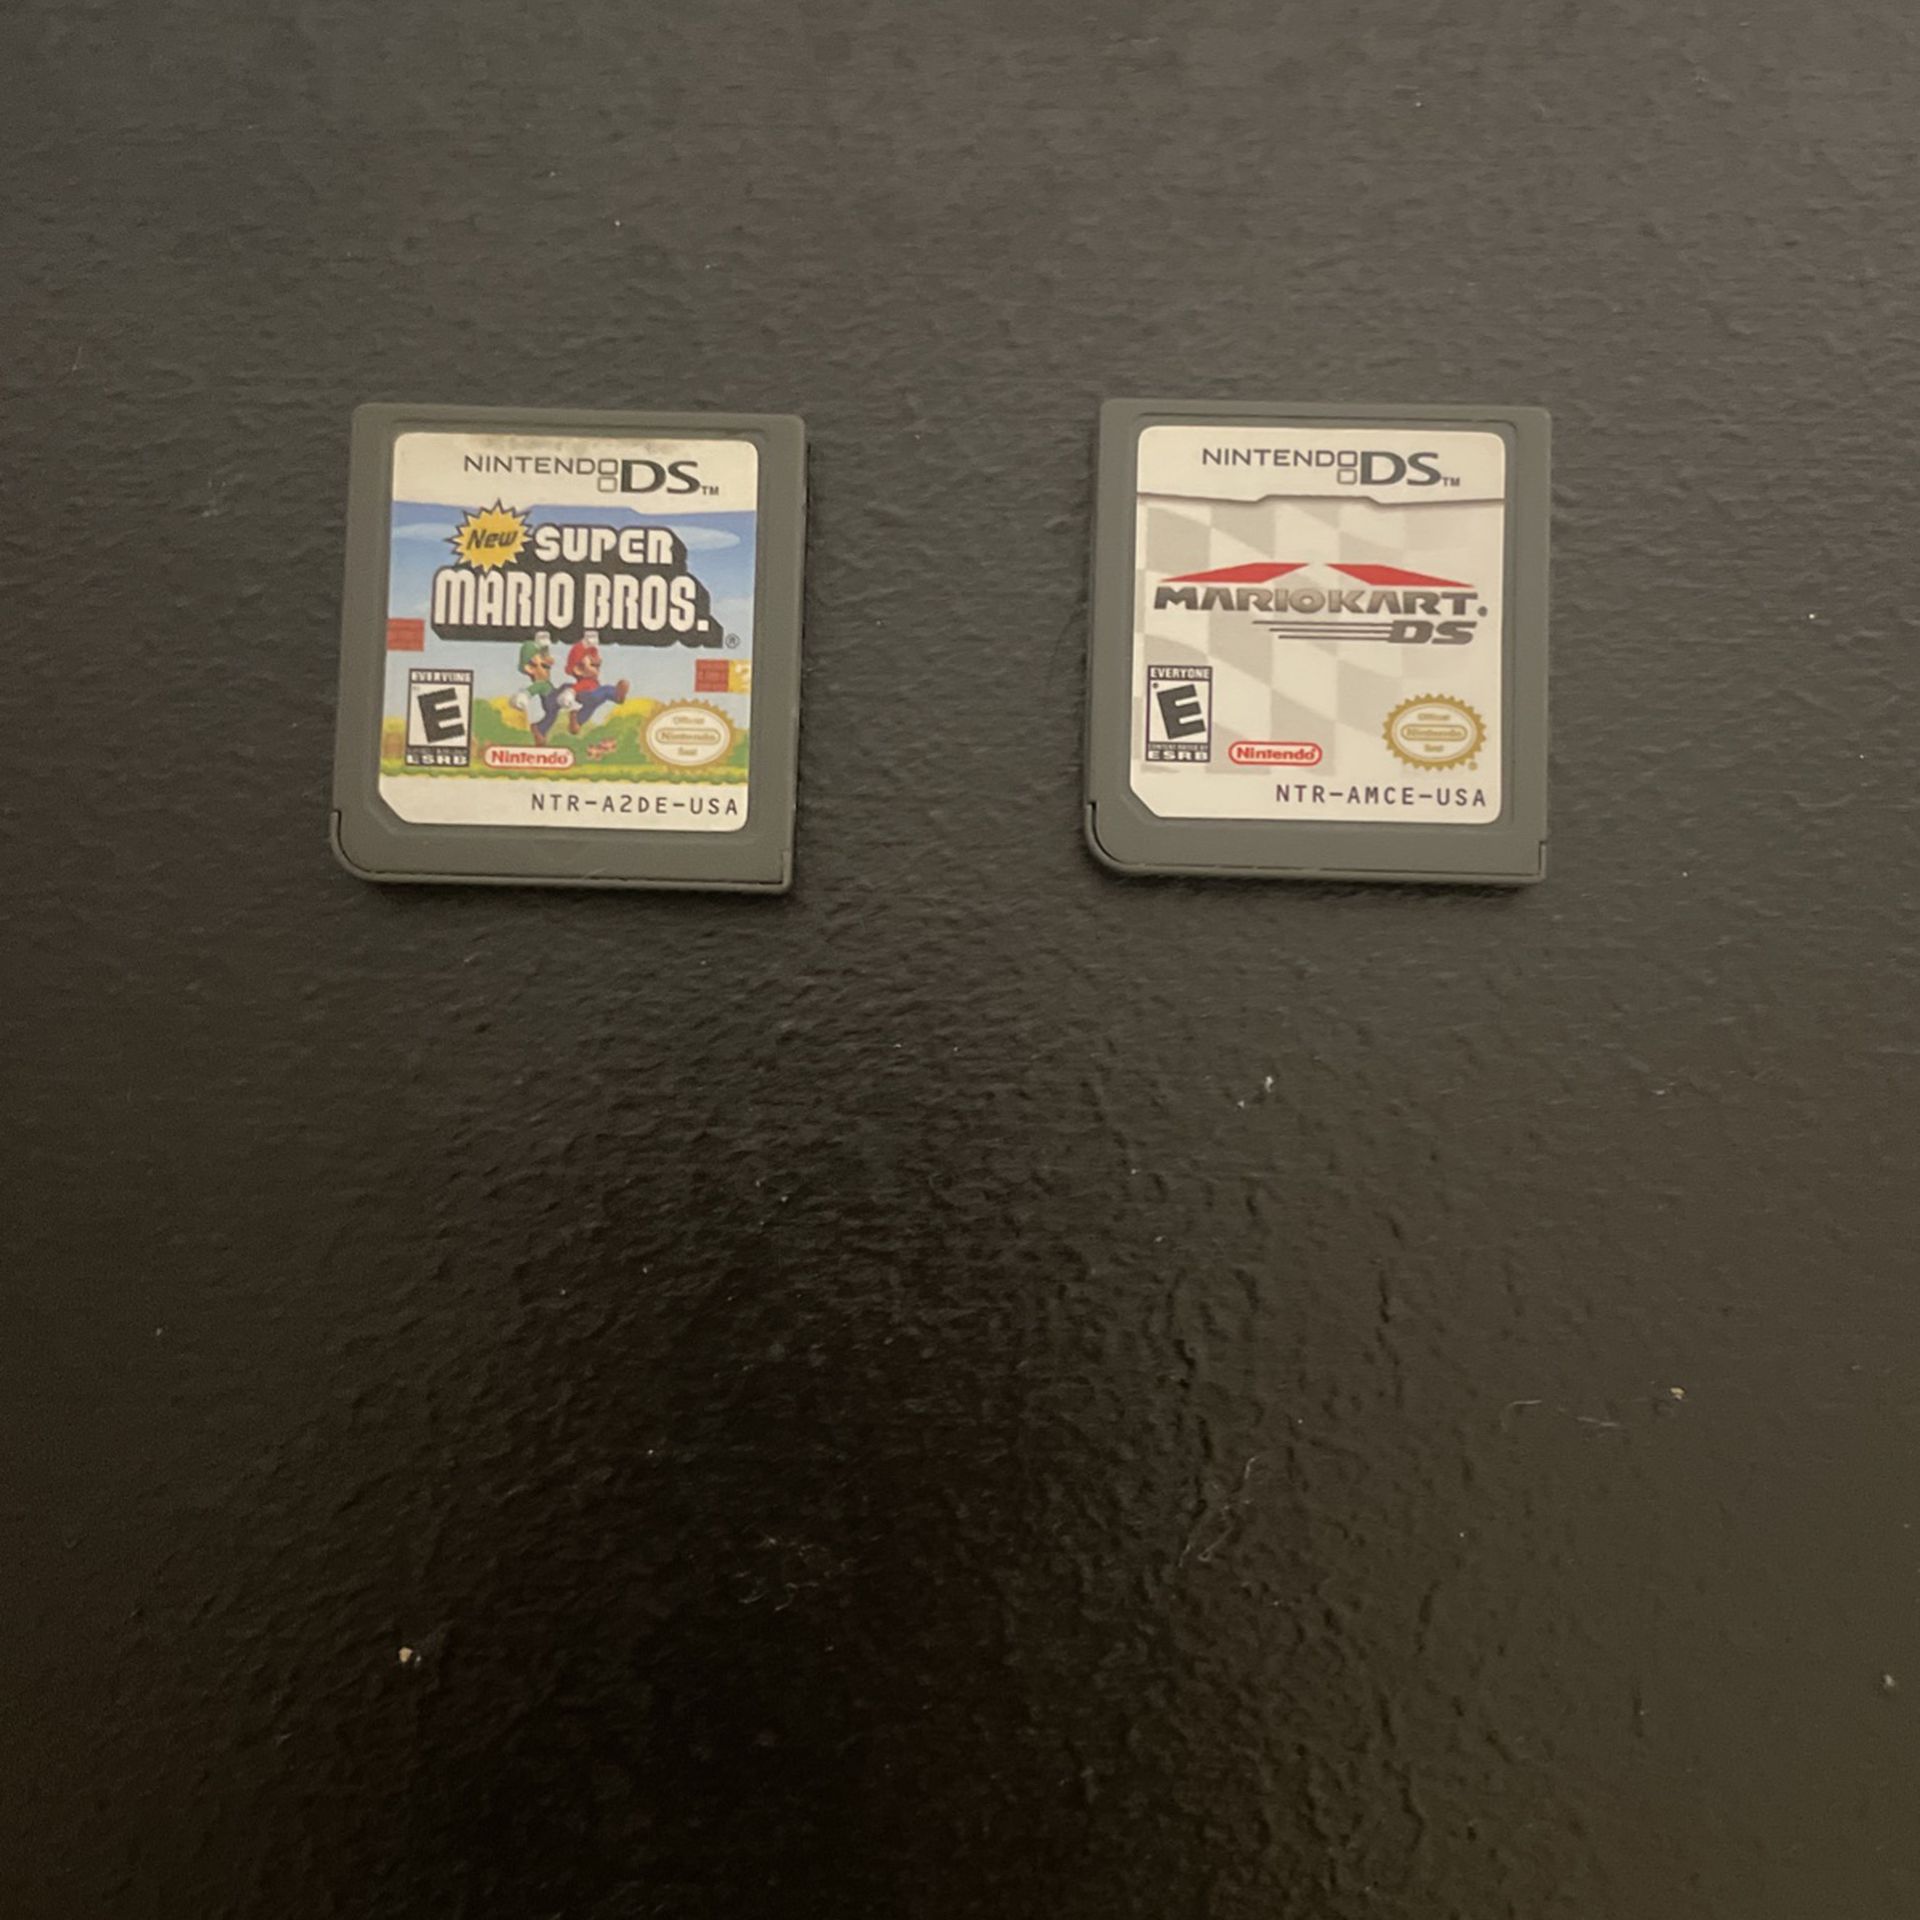 Super Mario Bros Ds Game And Mario Kart Ds Game